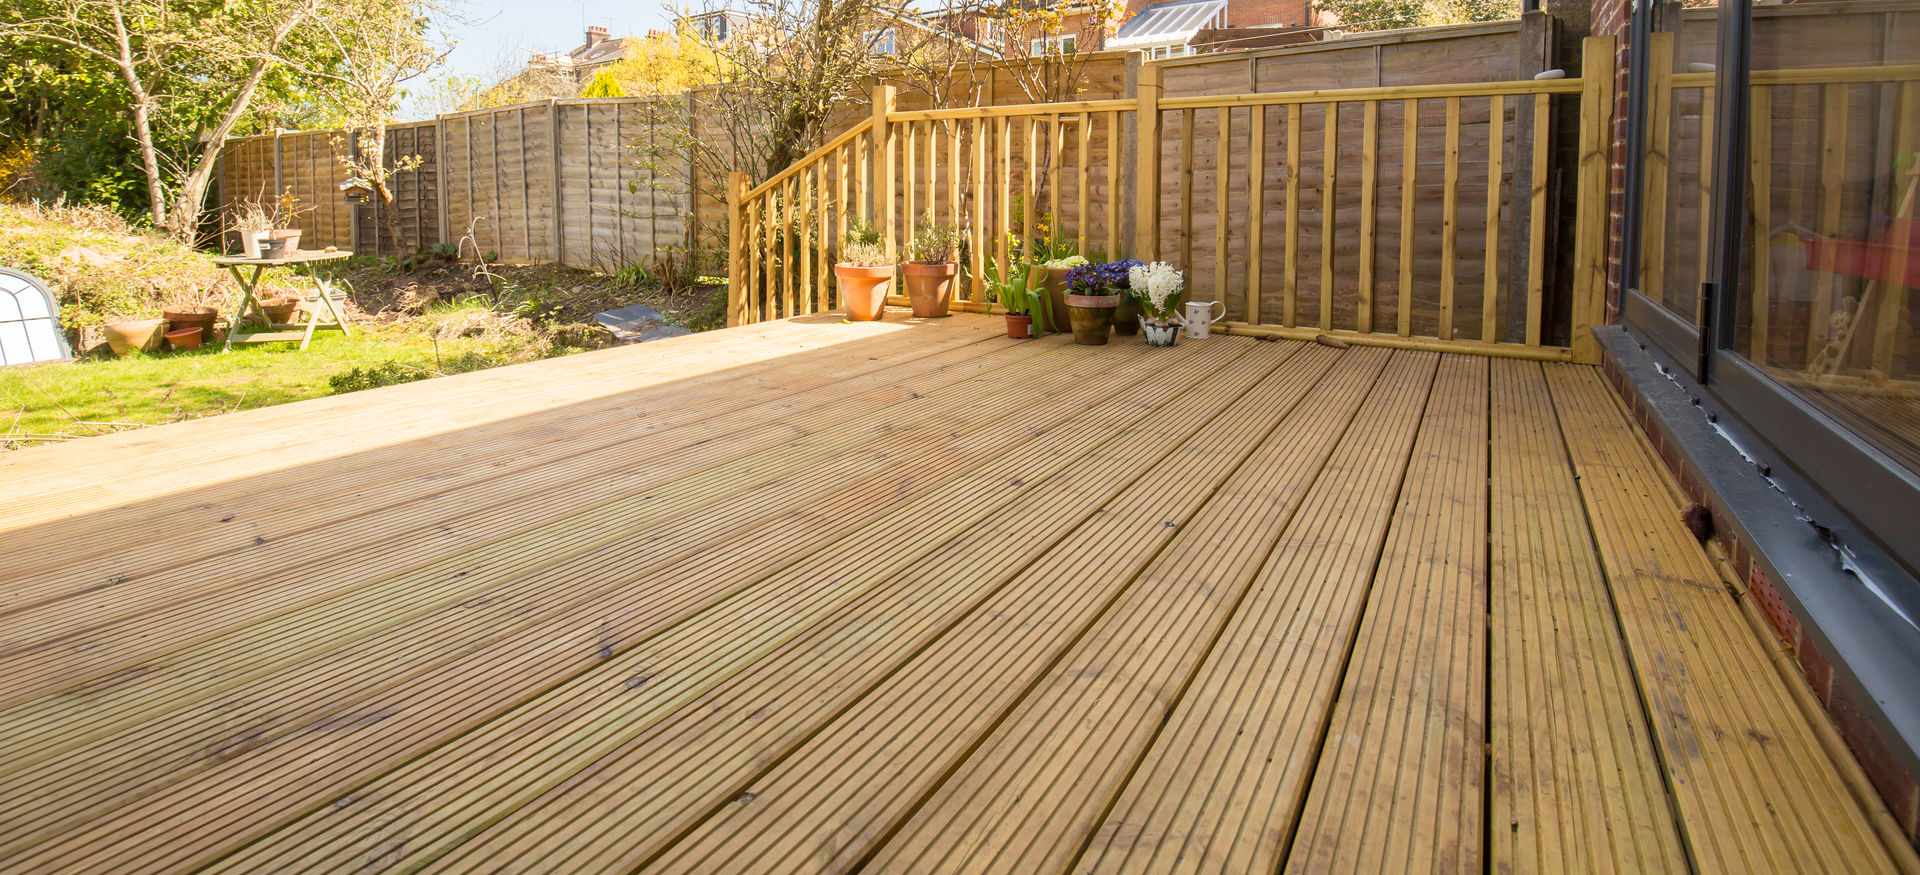 Can you imagine your summers out on this decking? homify بلكونة أو شرفة خشب Wood effect patio,decking,garden